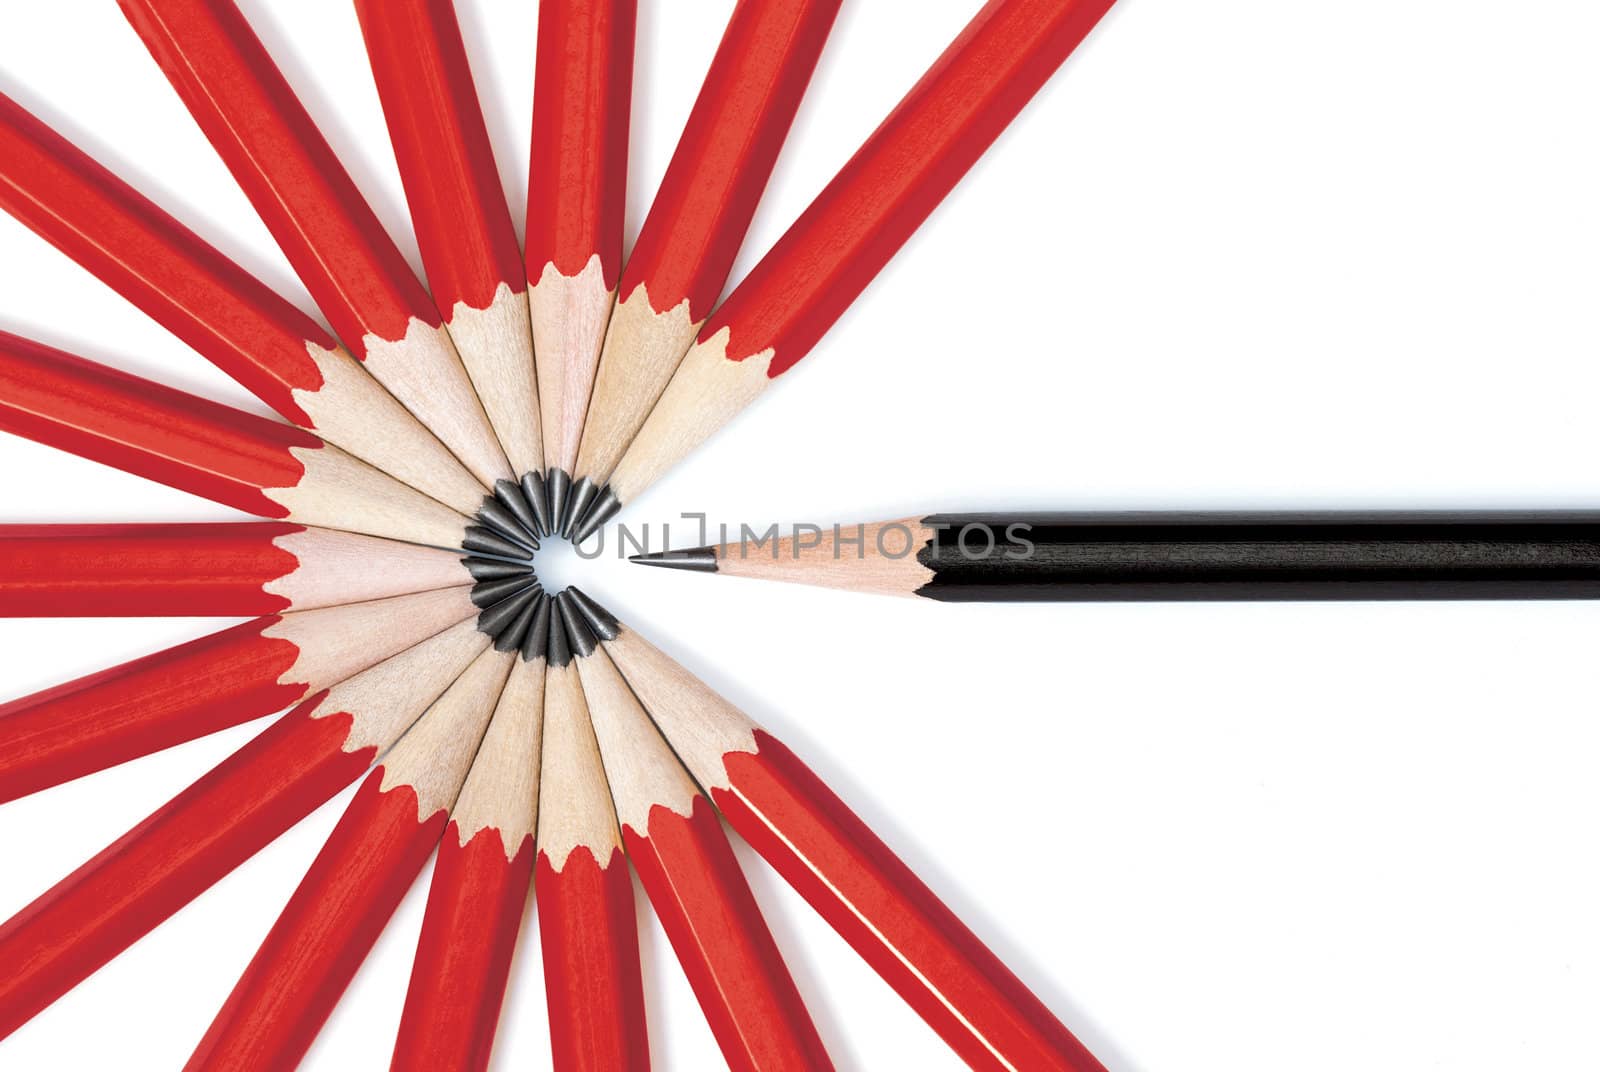 Close up of a black pencil standing out from a circle formed by the tips of several red pencils. Isolated on white